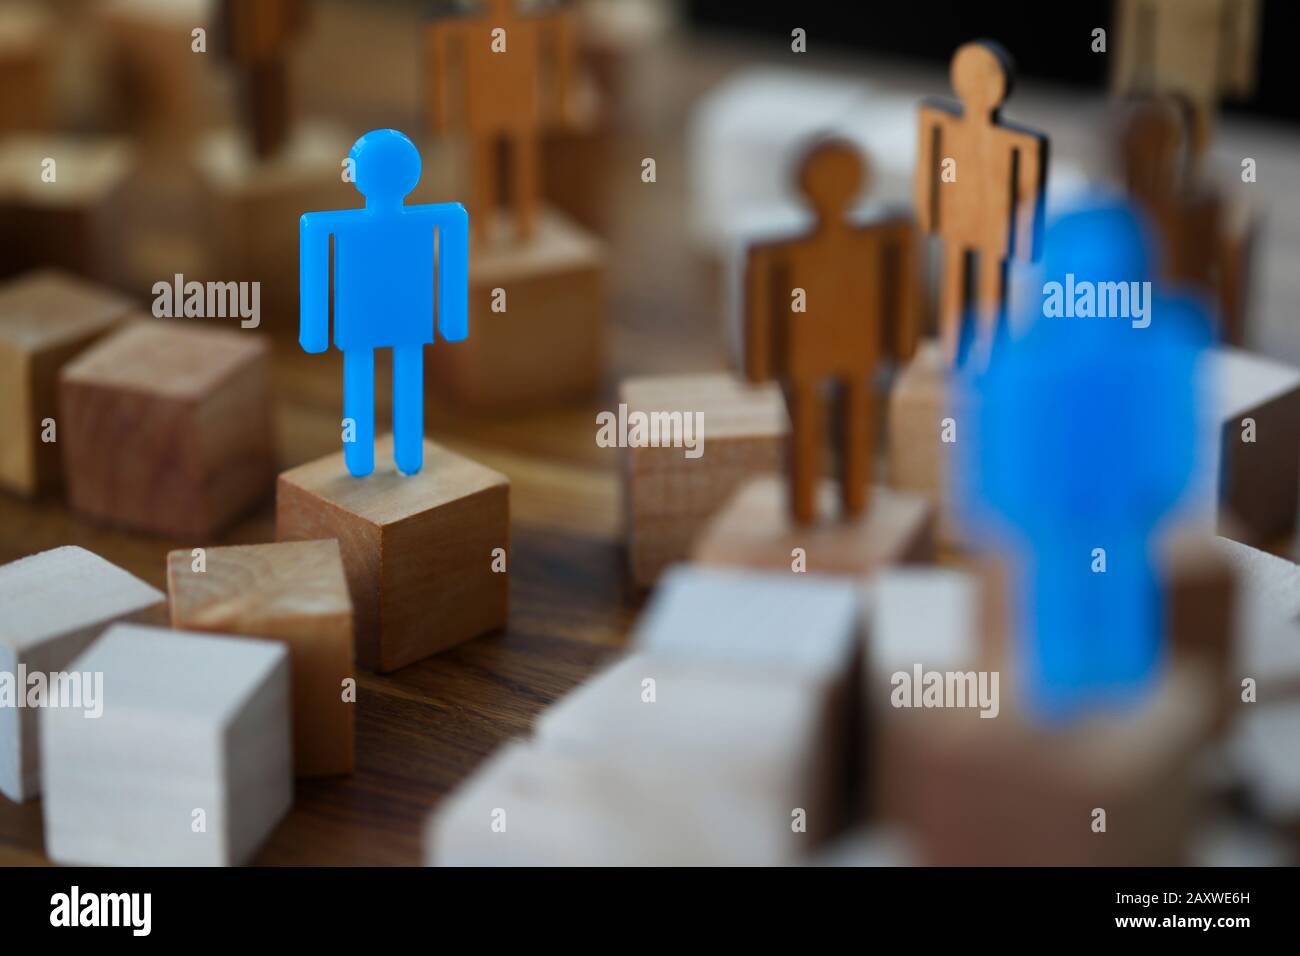 Lonely blue toy man figurine met soul mate closeup Stock Photo